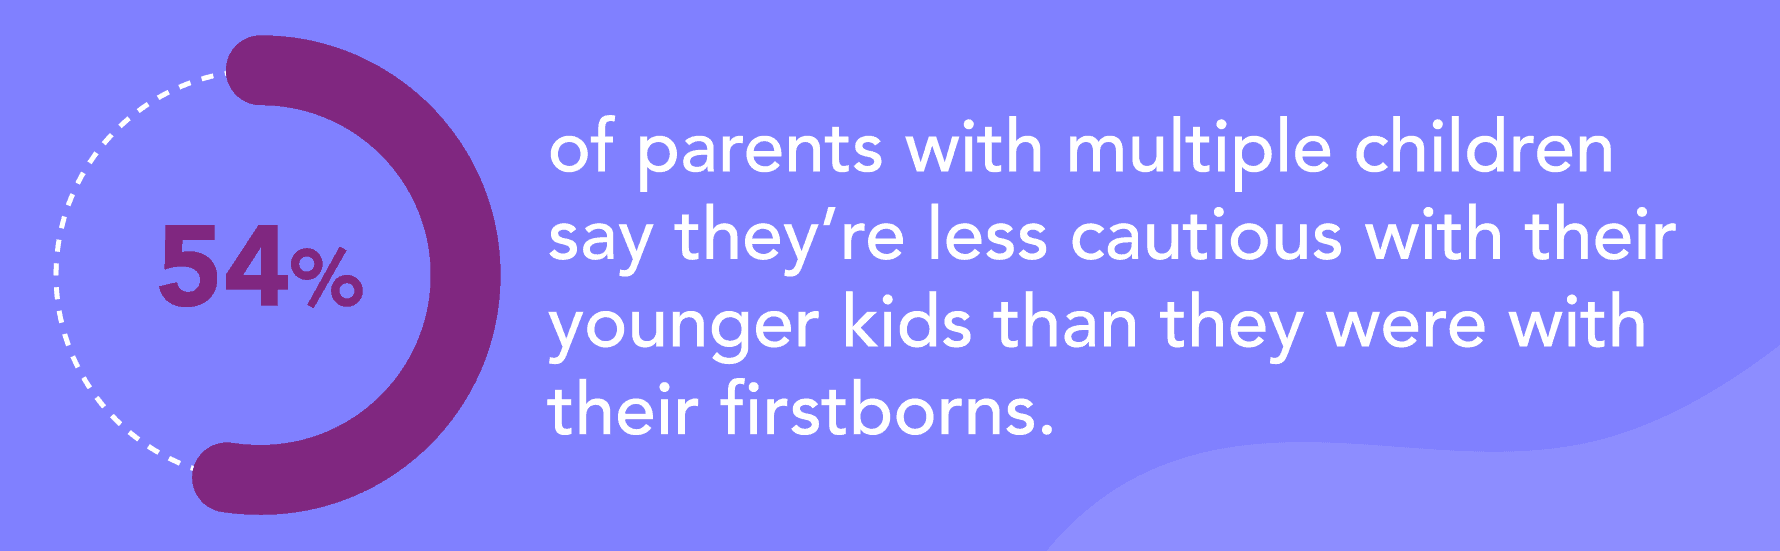 54% of parents with multiple children say they're less cautious with their younger kids than they were with their firstborns.